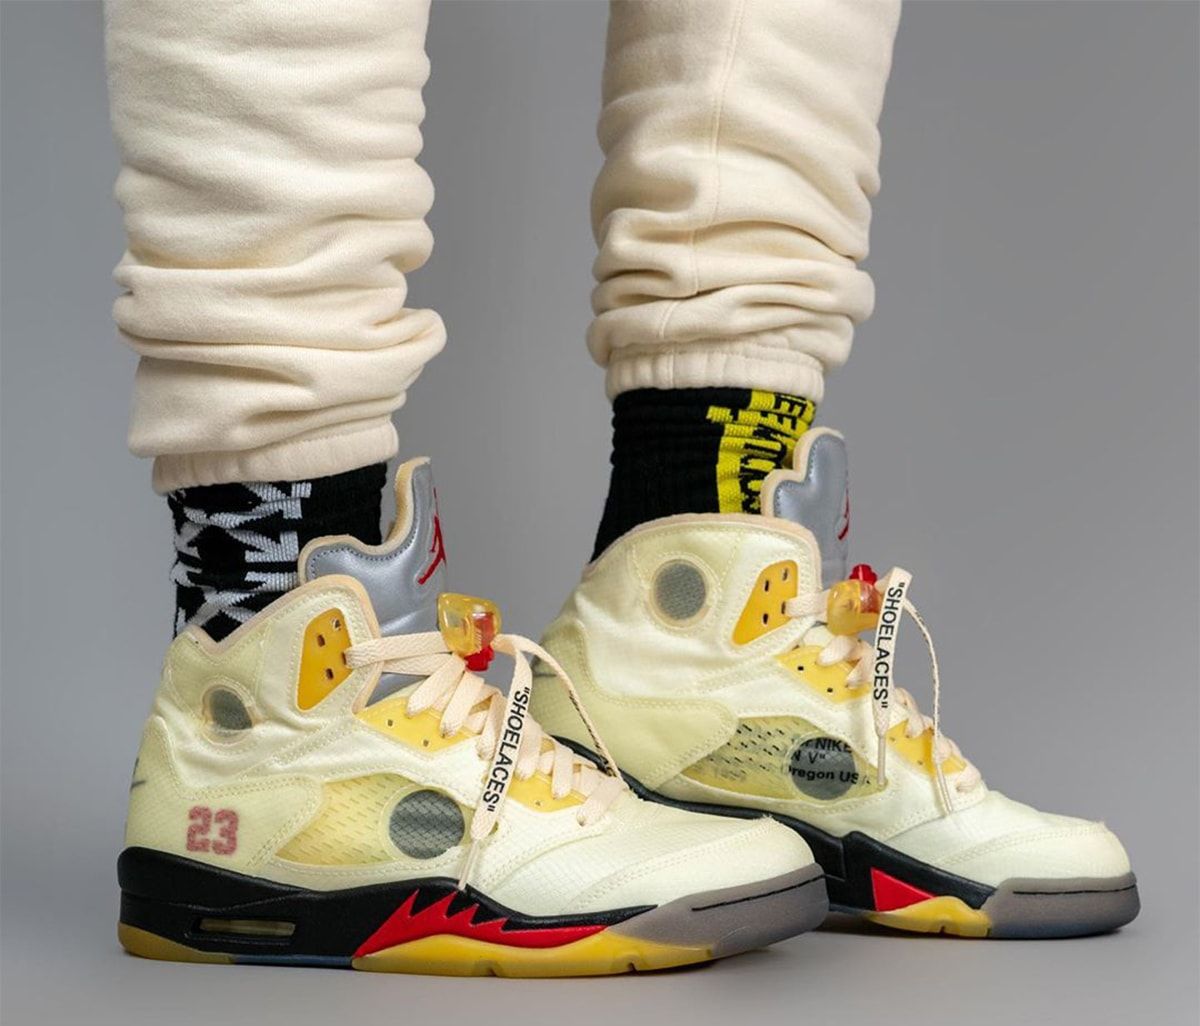 OFF-WHITE x Air Jordan 5 “Fire Red” Releases October 29 | House of